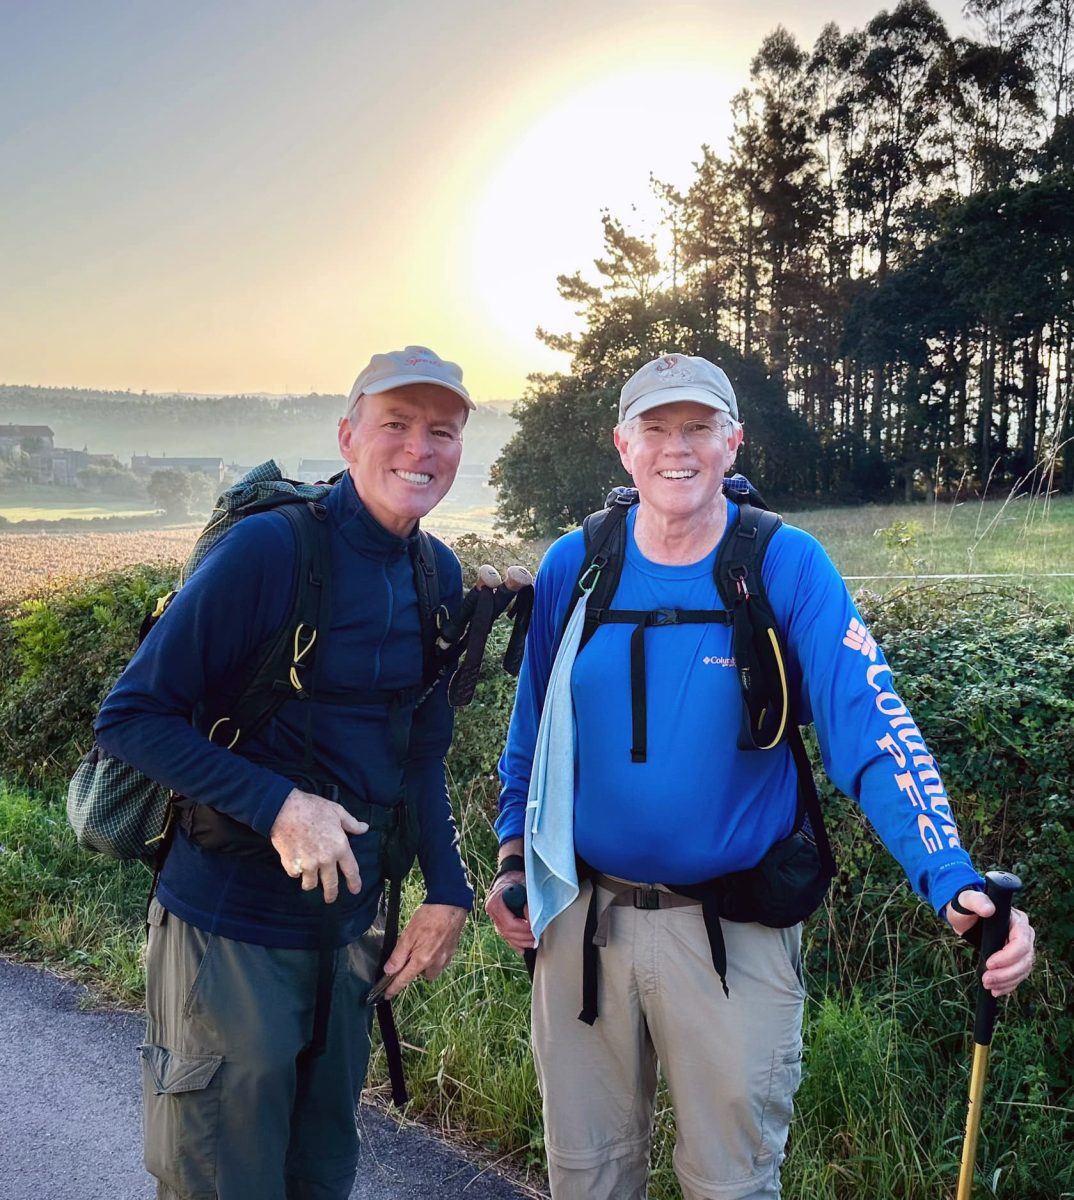 Brother Shamus Returns to Loretto After Hike Across Spain